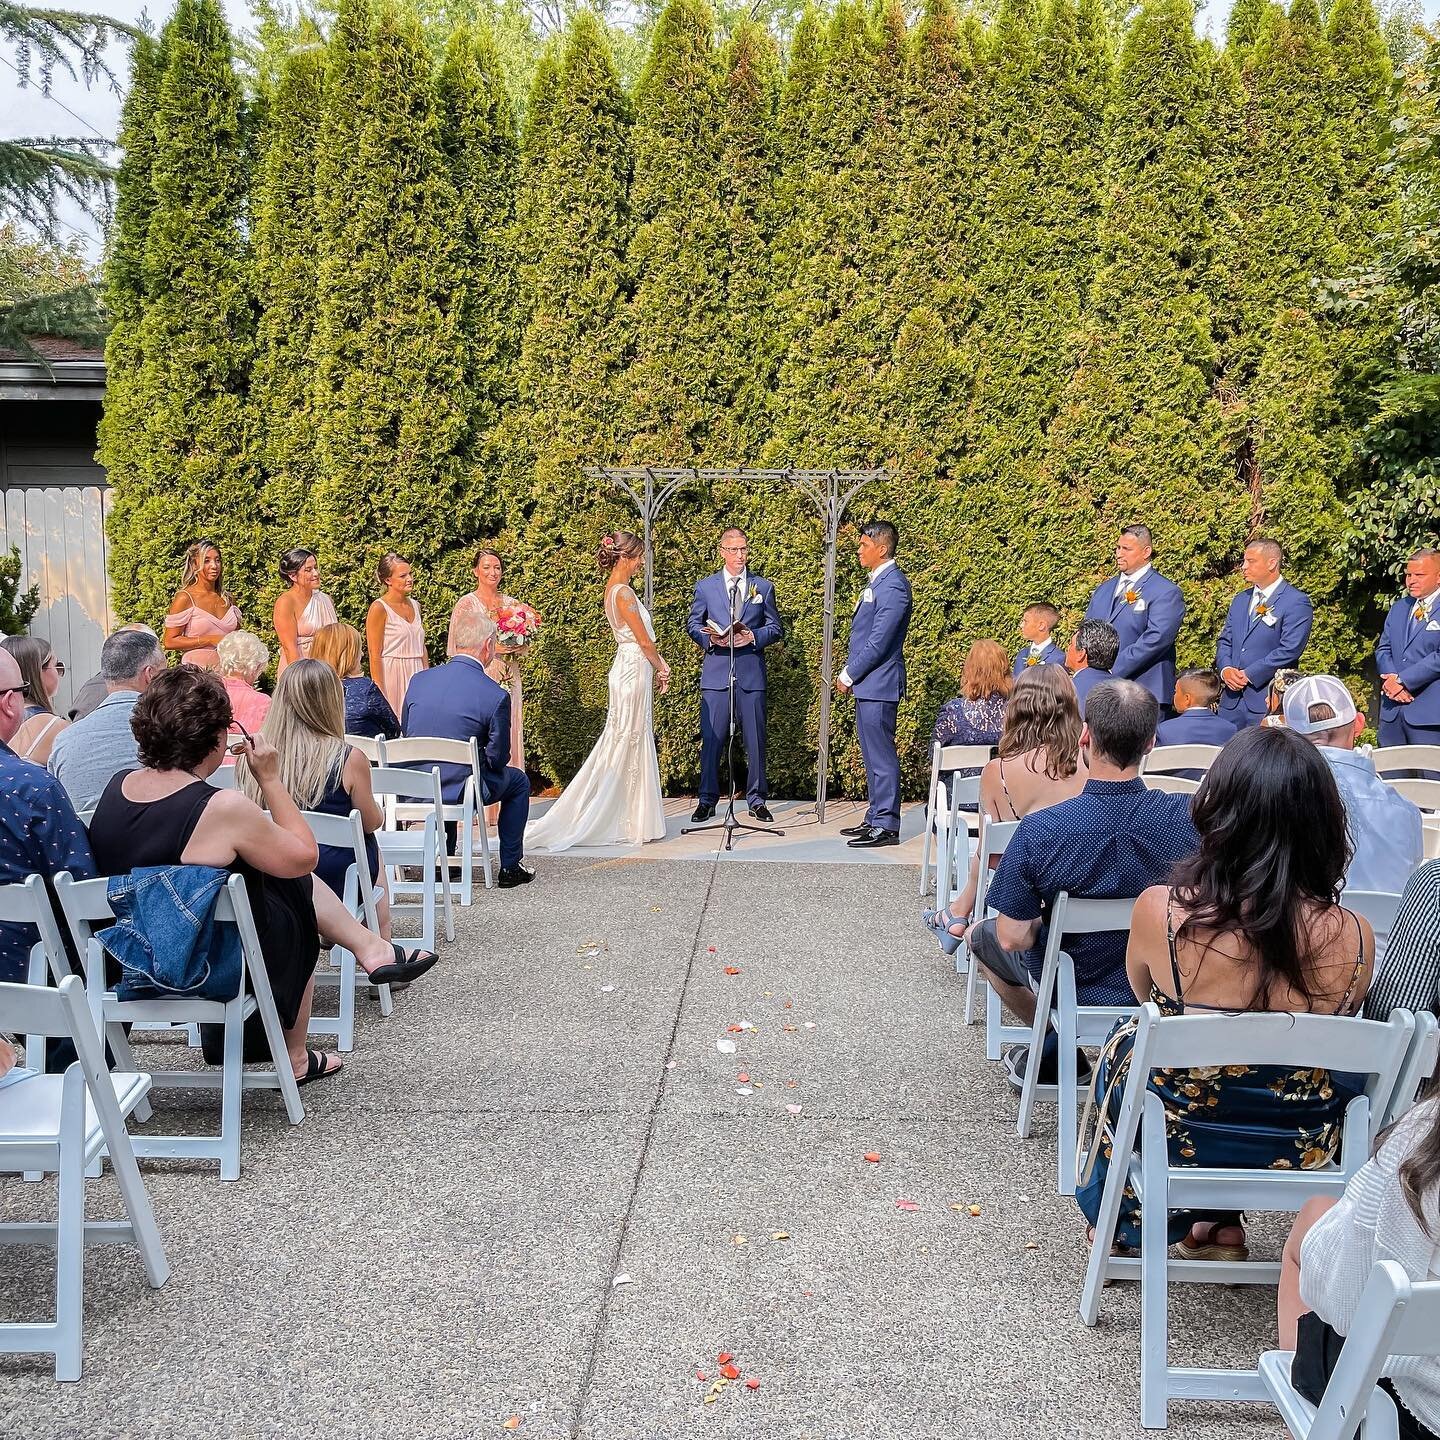 Looking for a space to host an intimate wedding in the summer of 2022? We have some great Saturdays available for this summer in July and August. Contact us for a tour! 

#Wedding #PDXWedding #Weddingplanning #2022wedding #Oregonbride #Outdoorwedding